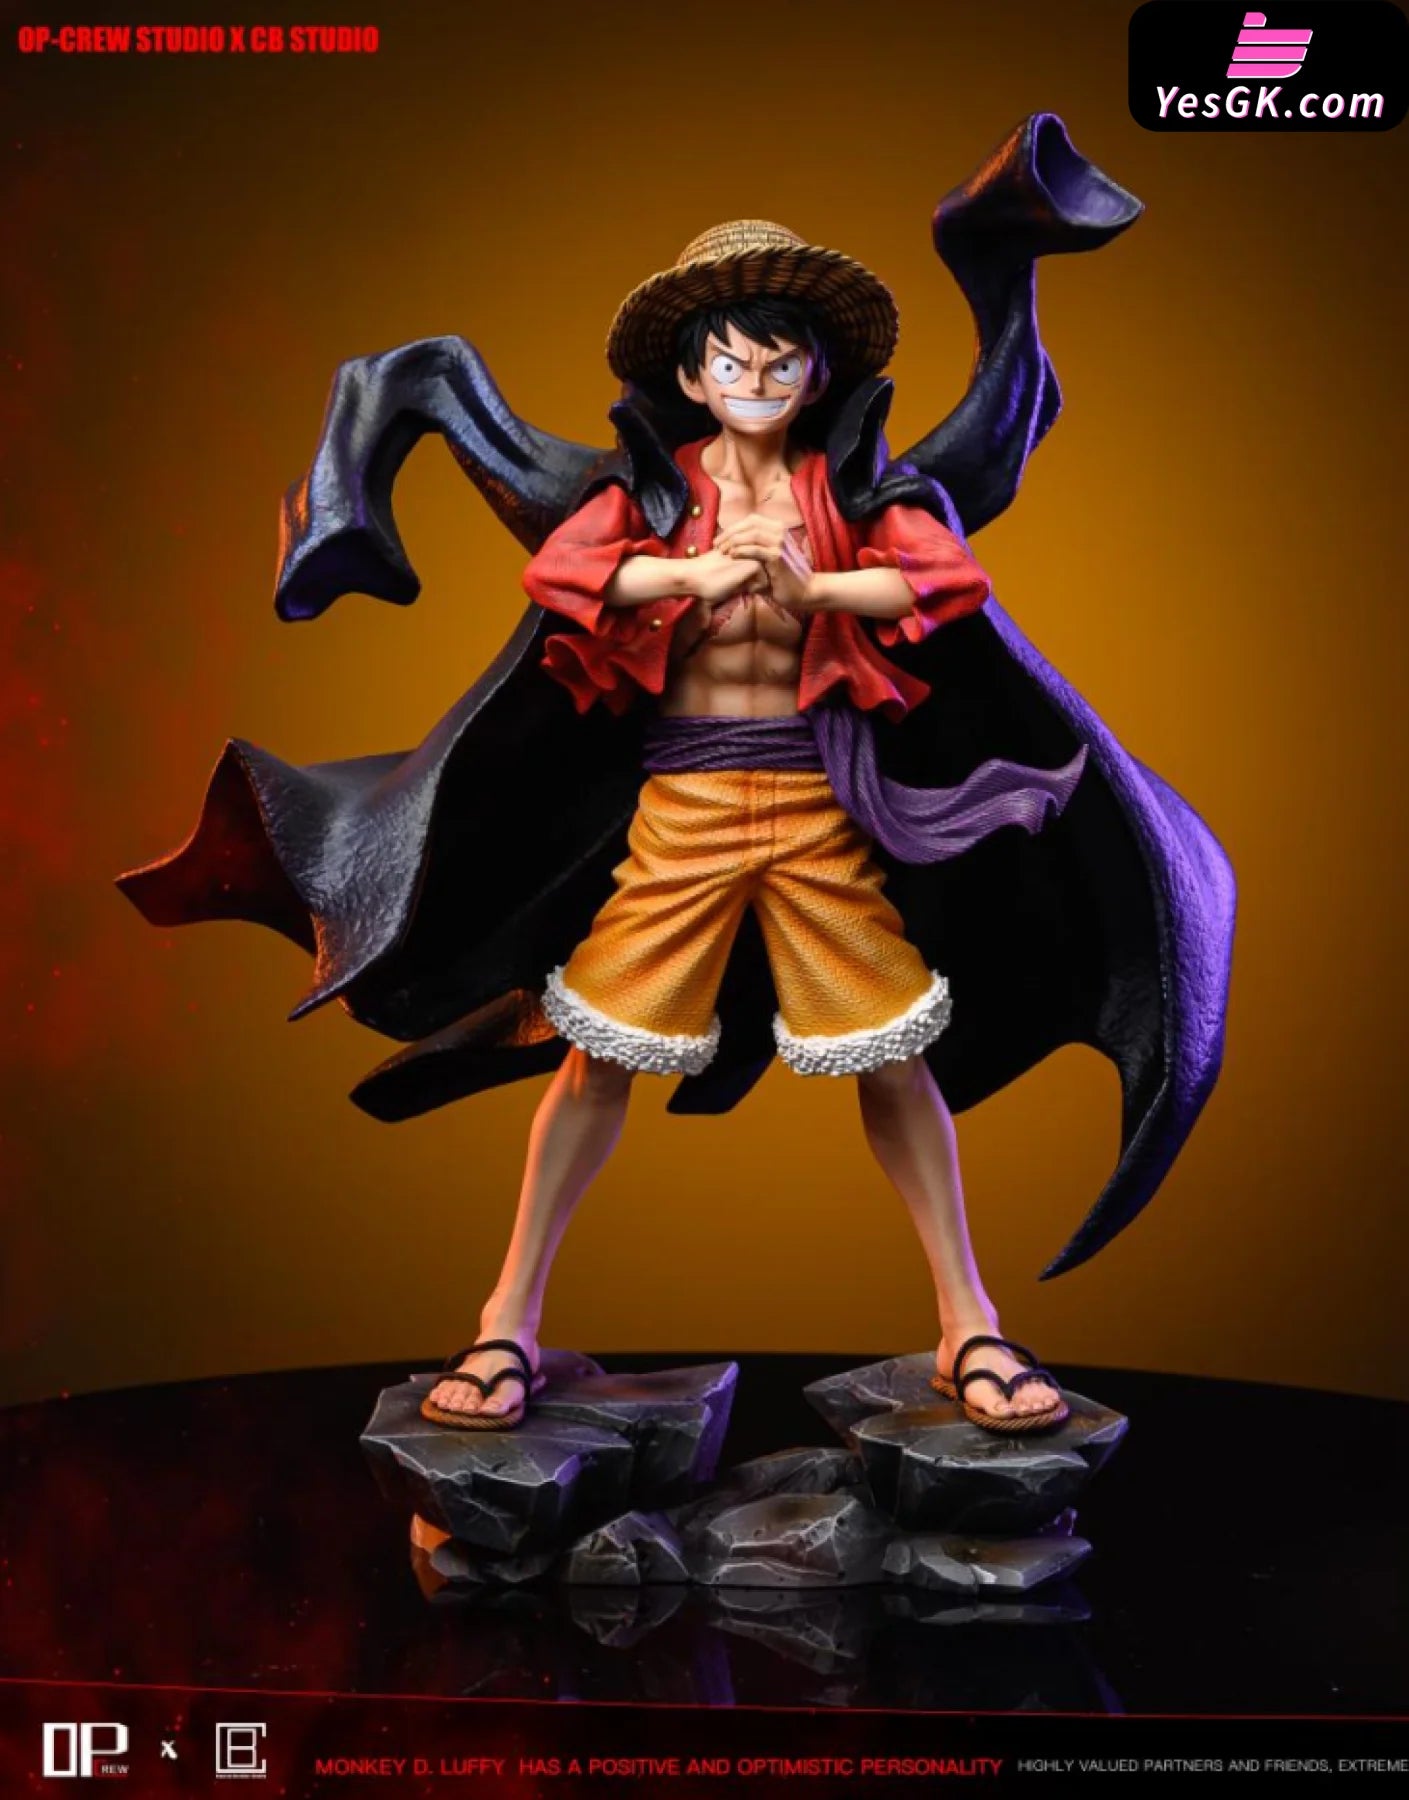 One Piece Monkey D. Luffy Resin Statue - Op-Crew Studio & Cousin Brother [Pre-Order]